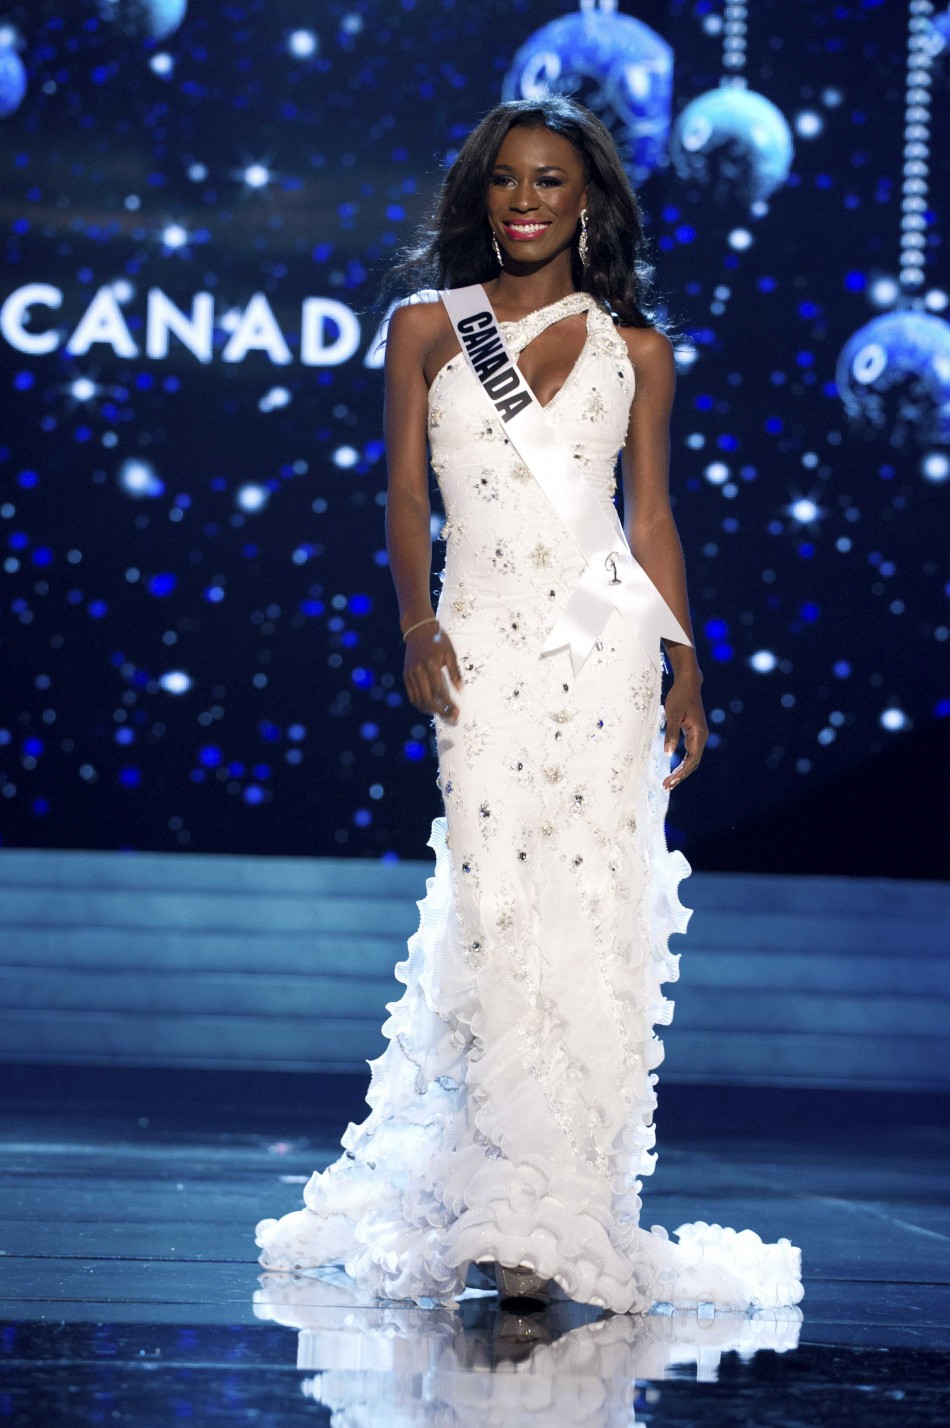 Miss Canada 2012 Yamoah competes during 2012 Miss Universe Presentation Show in Las Vegas